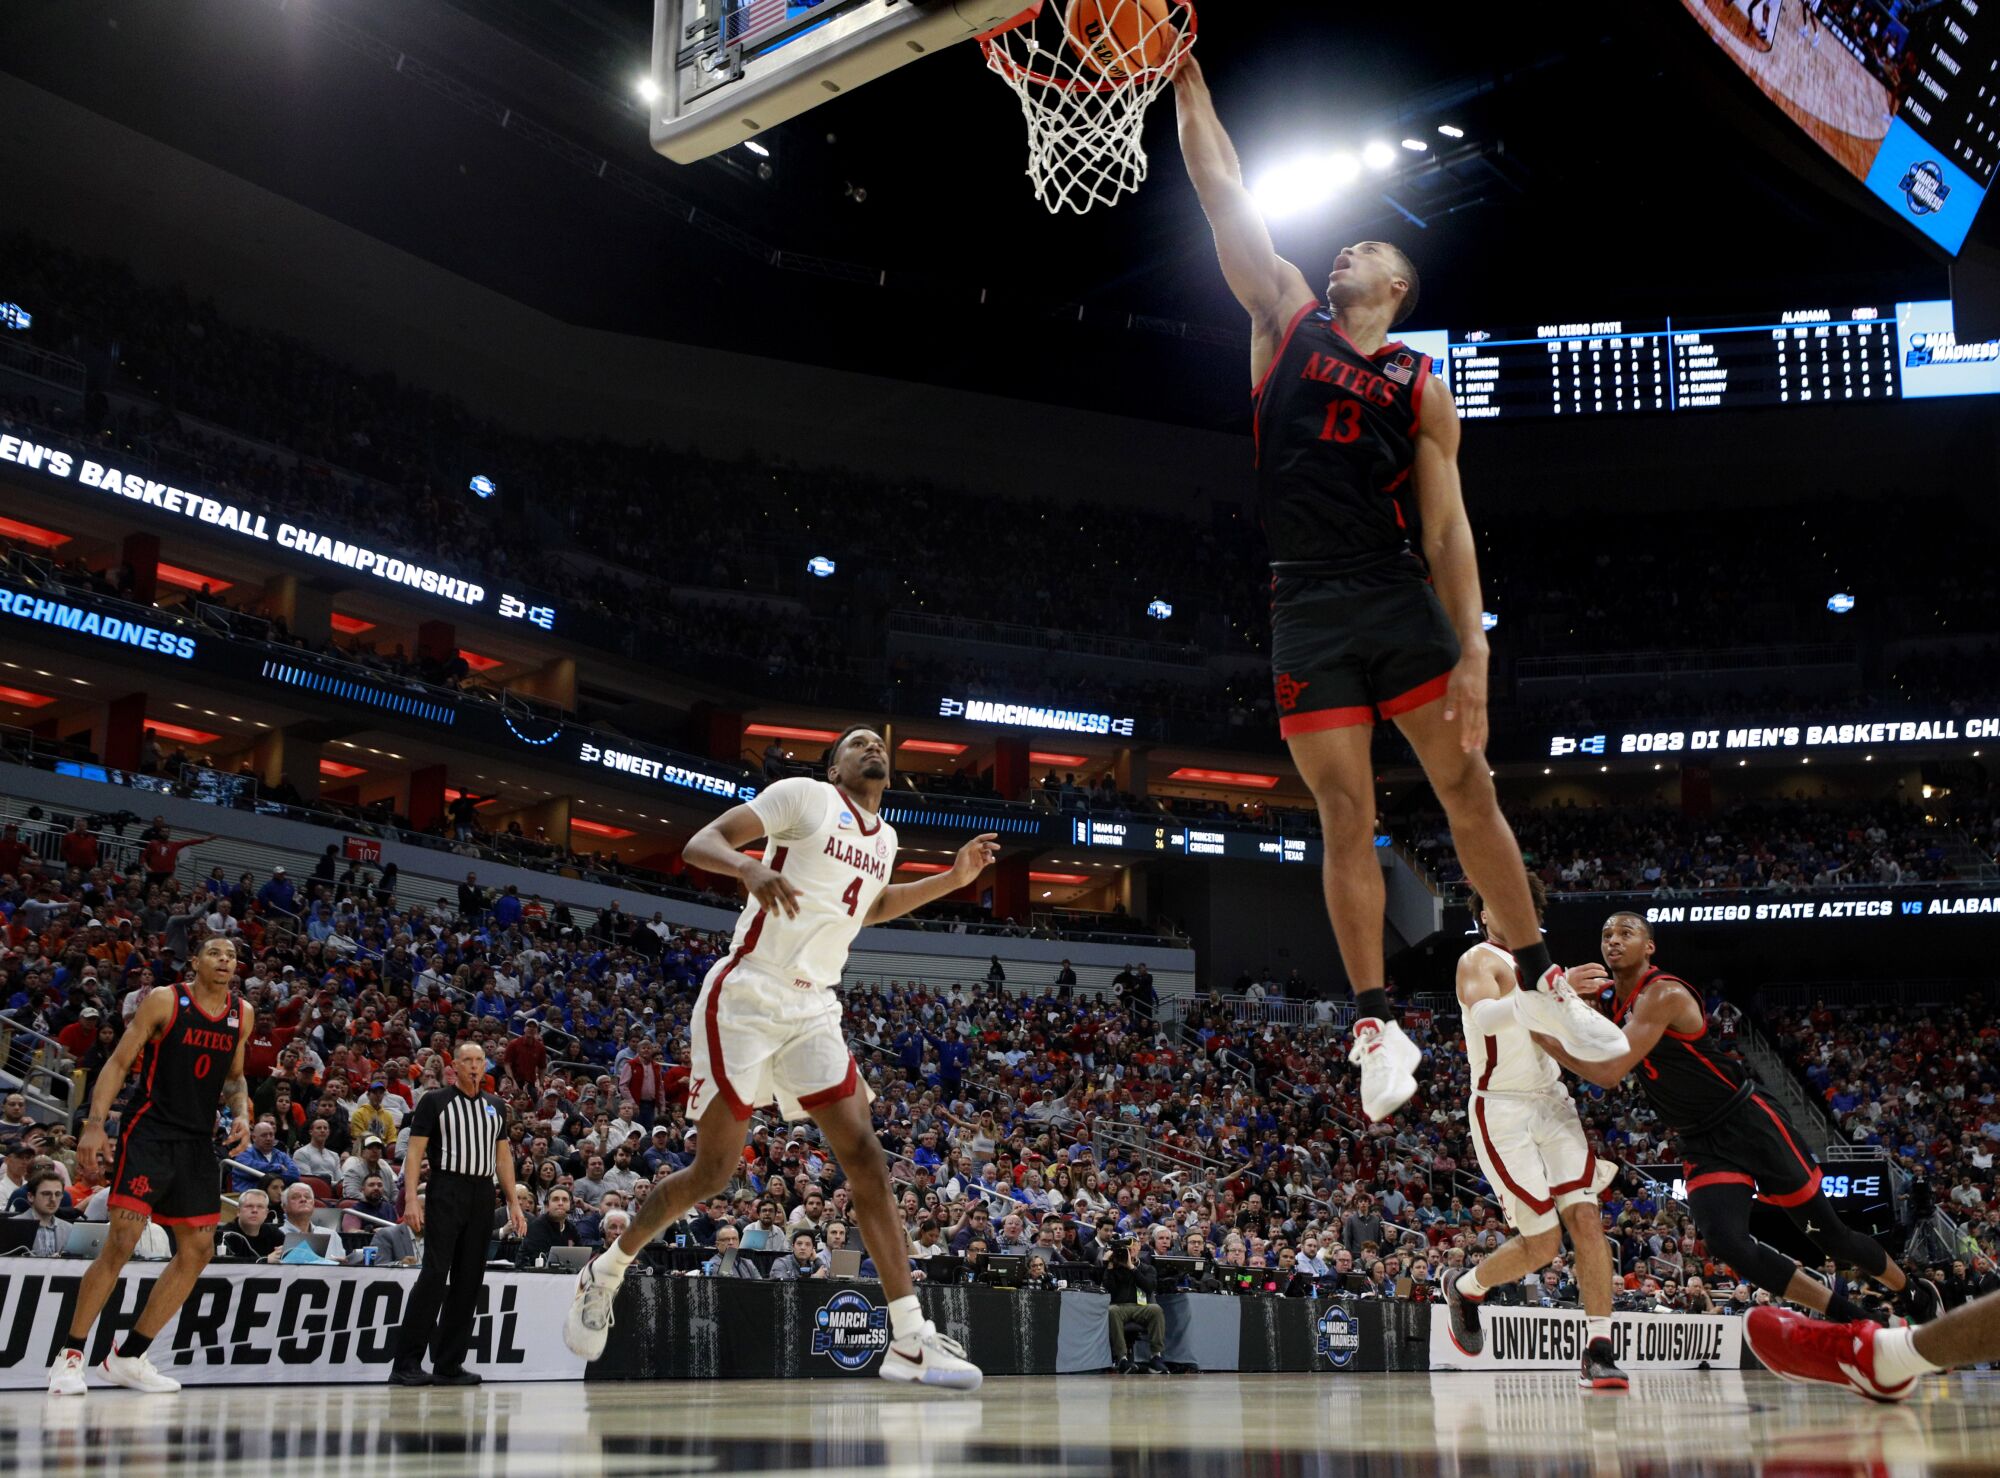 San Diego State's Jaedon LeDee slams the ball against Alabama in a Sweet 16 game in the NCAA Tournament.